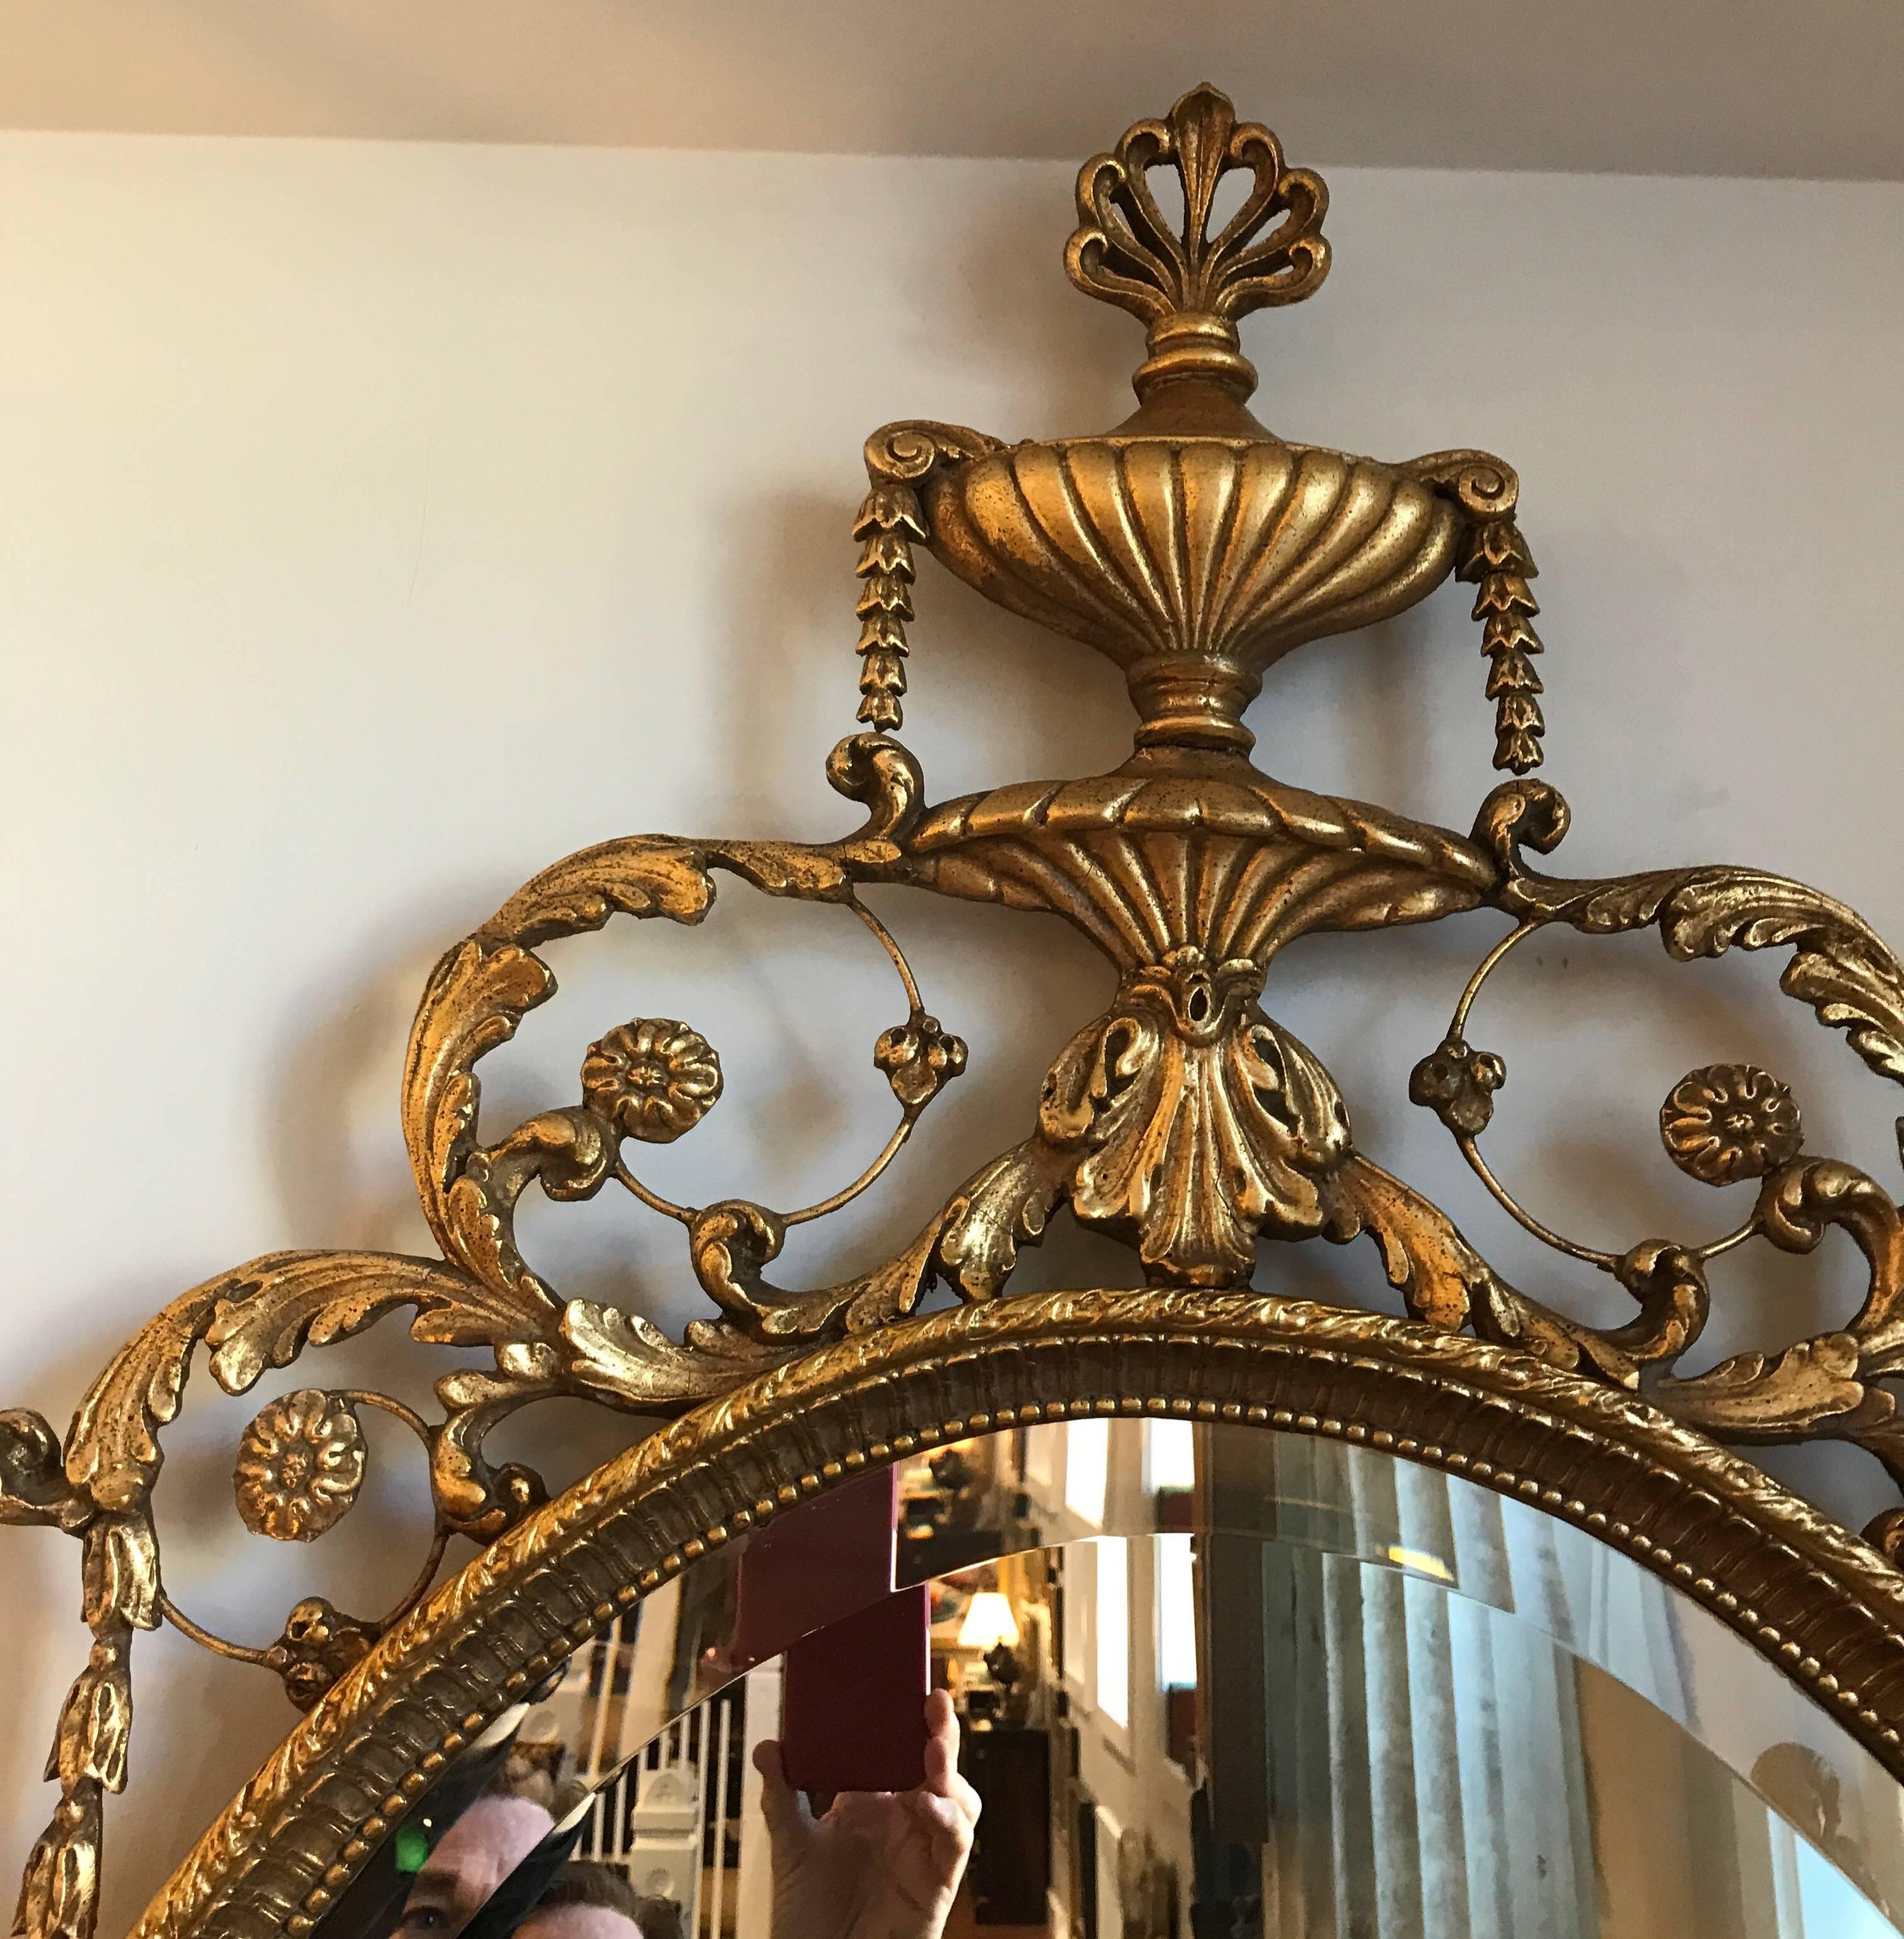 Timeless and elegant Adam style gilt wood and gesso mirror. The urn finial top with rosettes and scrolls and winged figures on each side. The bottom with swags and lower central finial. The mirror is beveled and has no silver loss and just the oval